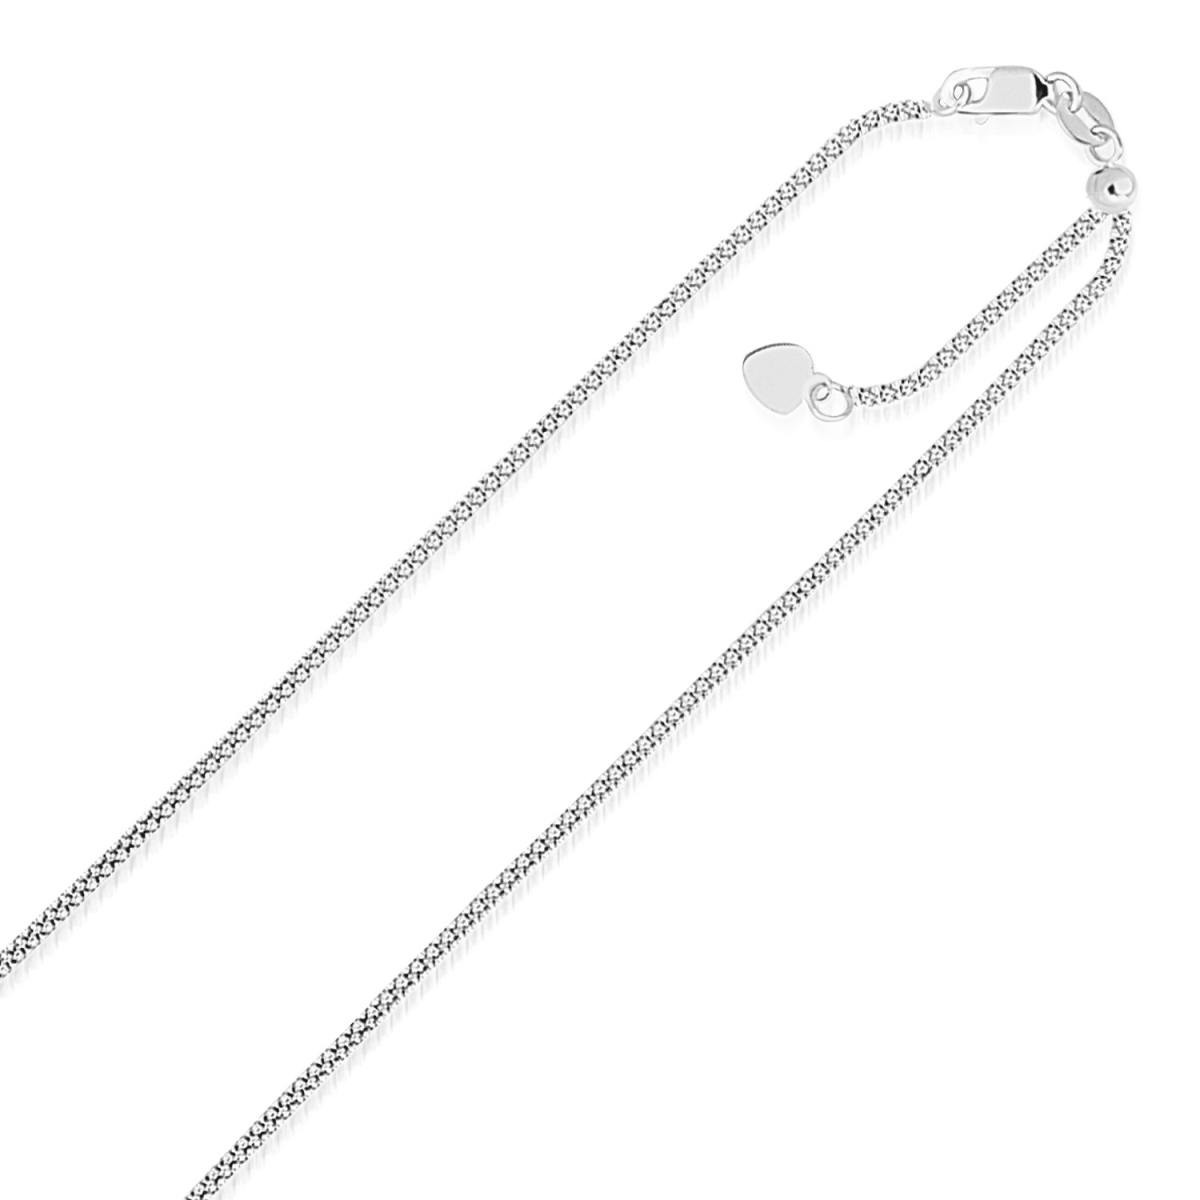 D194030-22 14k White Gold Adjustable Popcorn Chain, 1.3 Mm - Size 22 In.